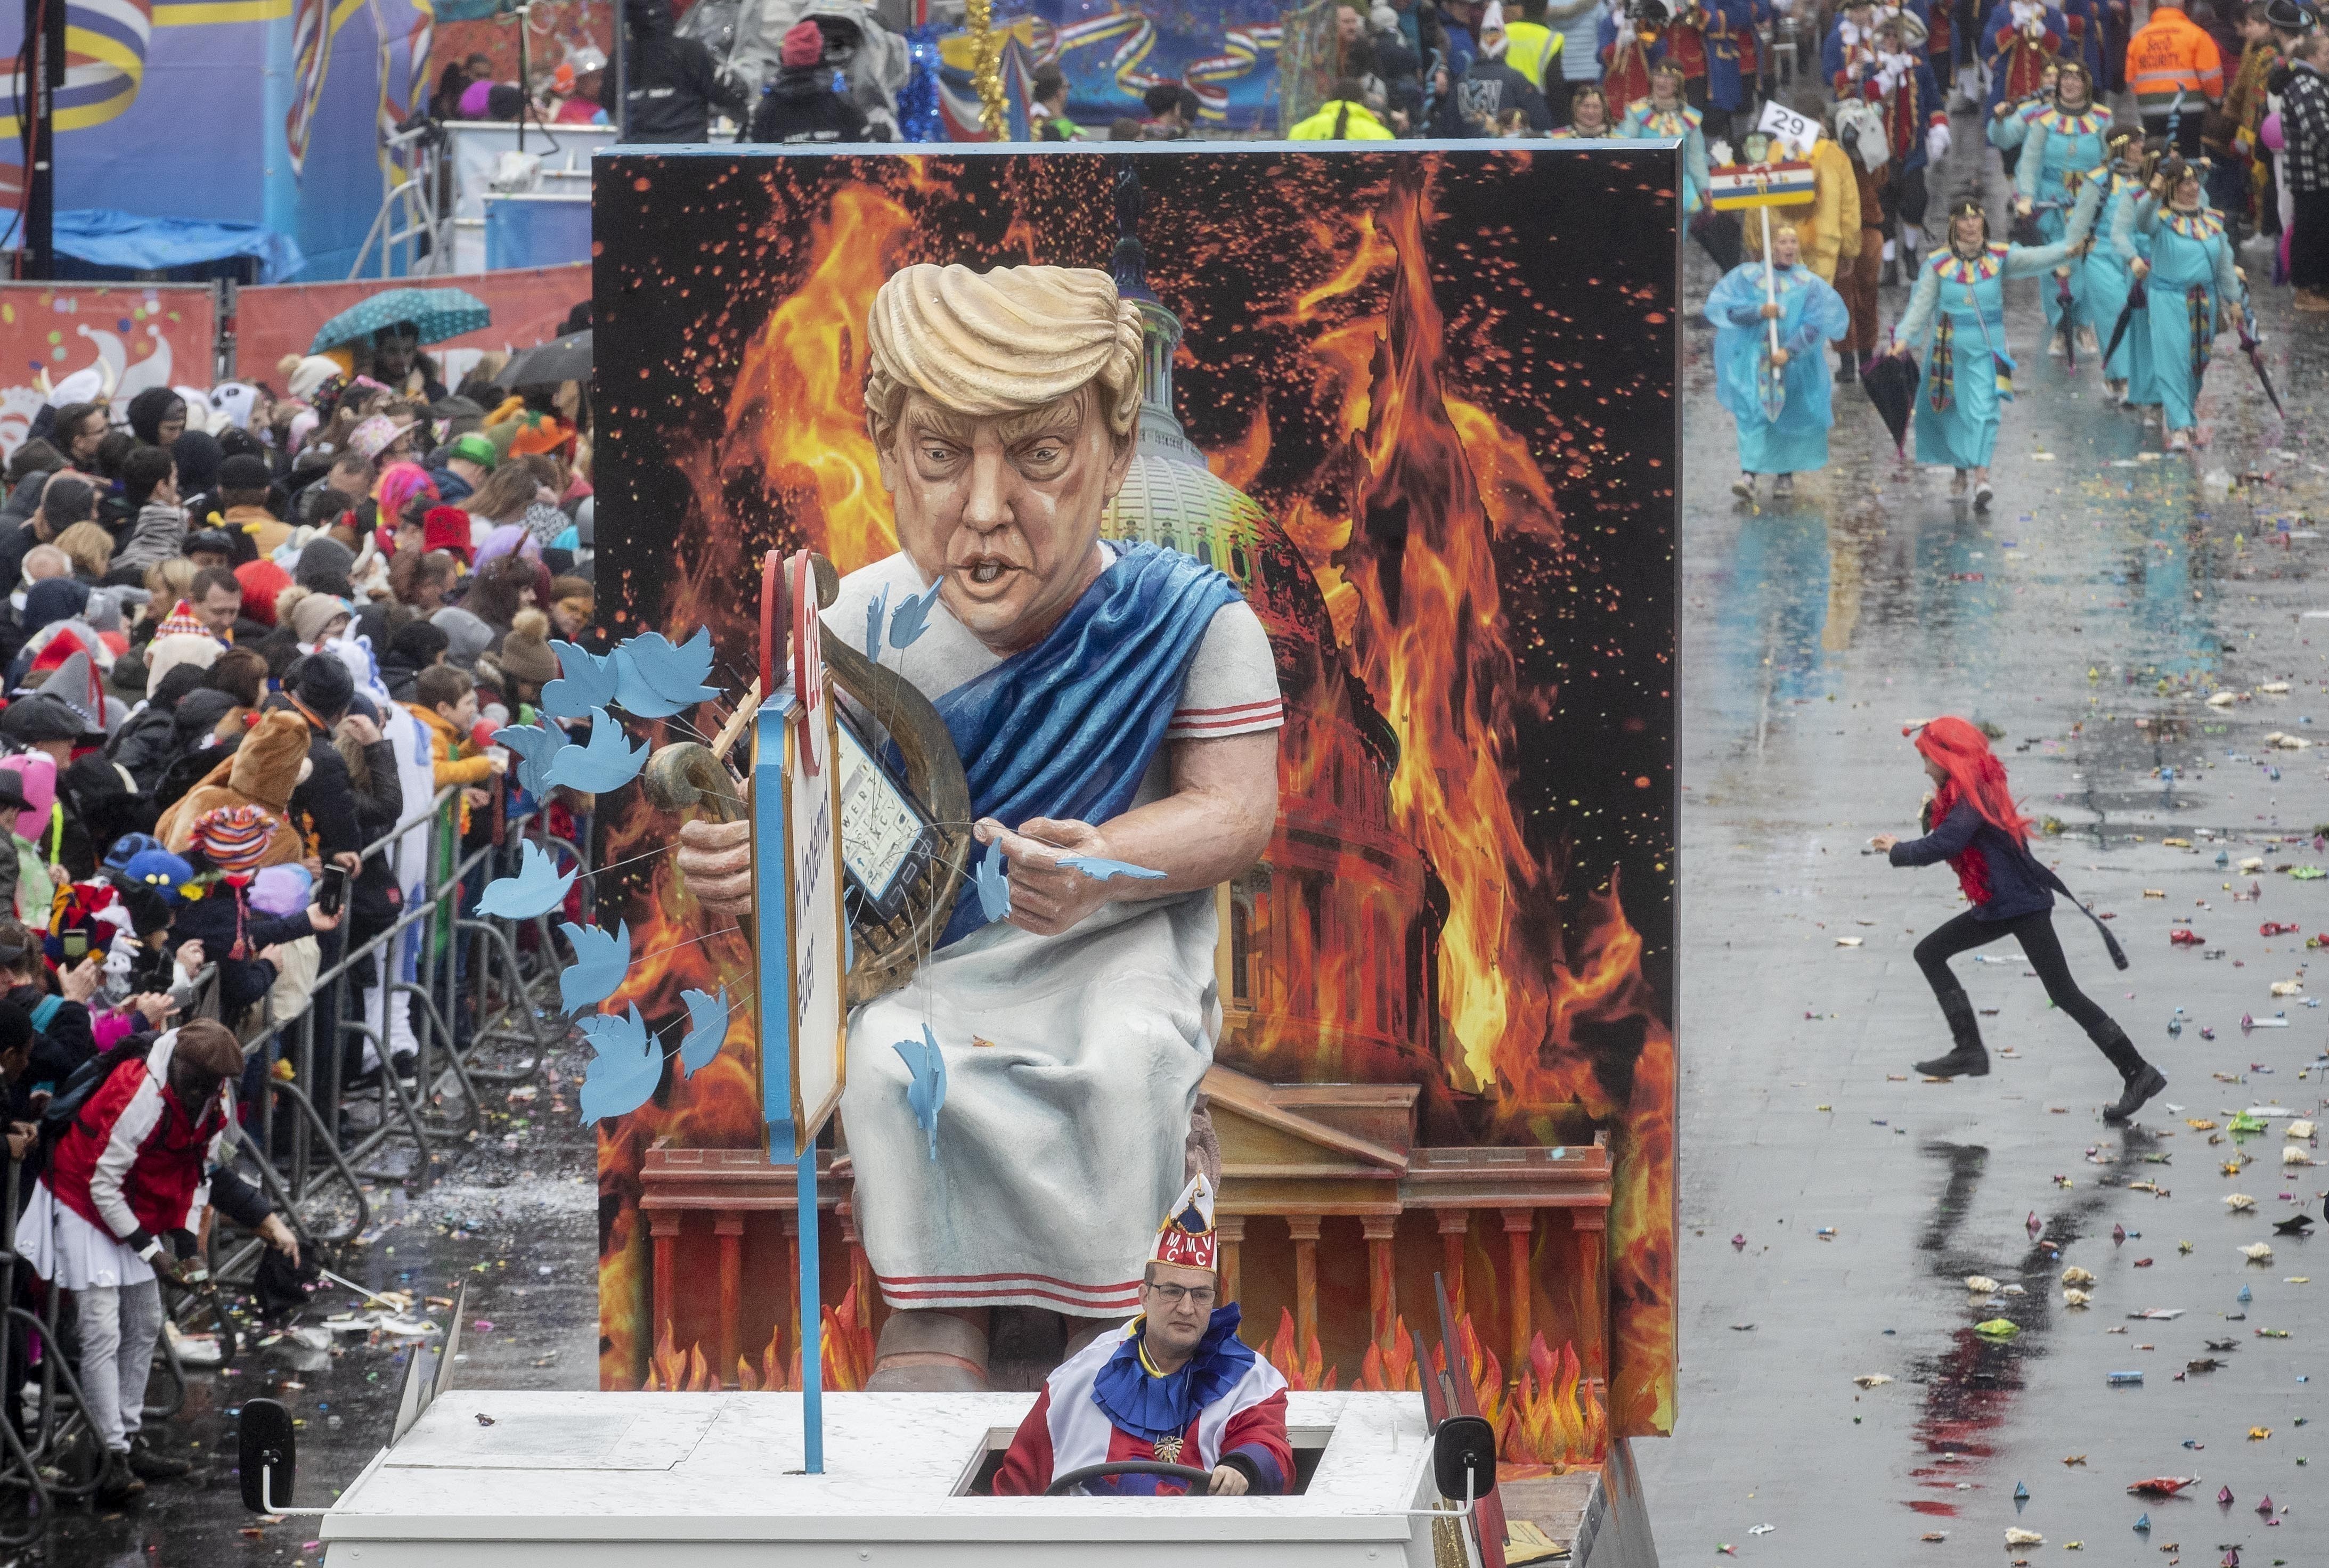 A figure depicting US President Donald Trump as Emperor Nero “fiddling while Rome burns” is displayed in a traditional carnival parade in Mainz, Germany. Photo: AP